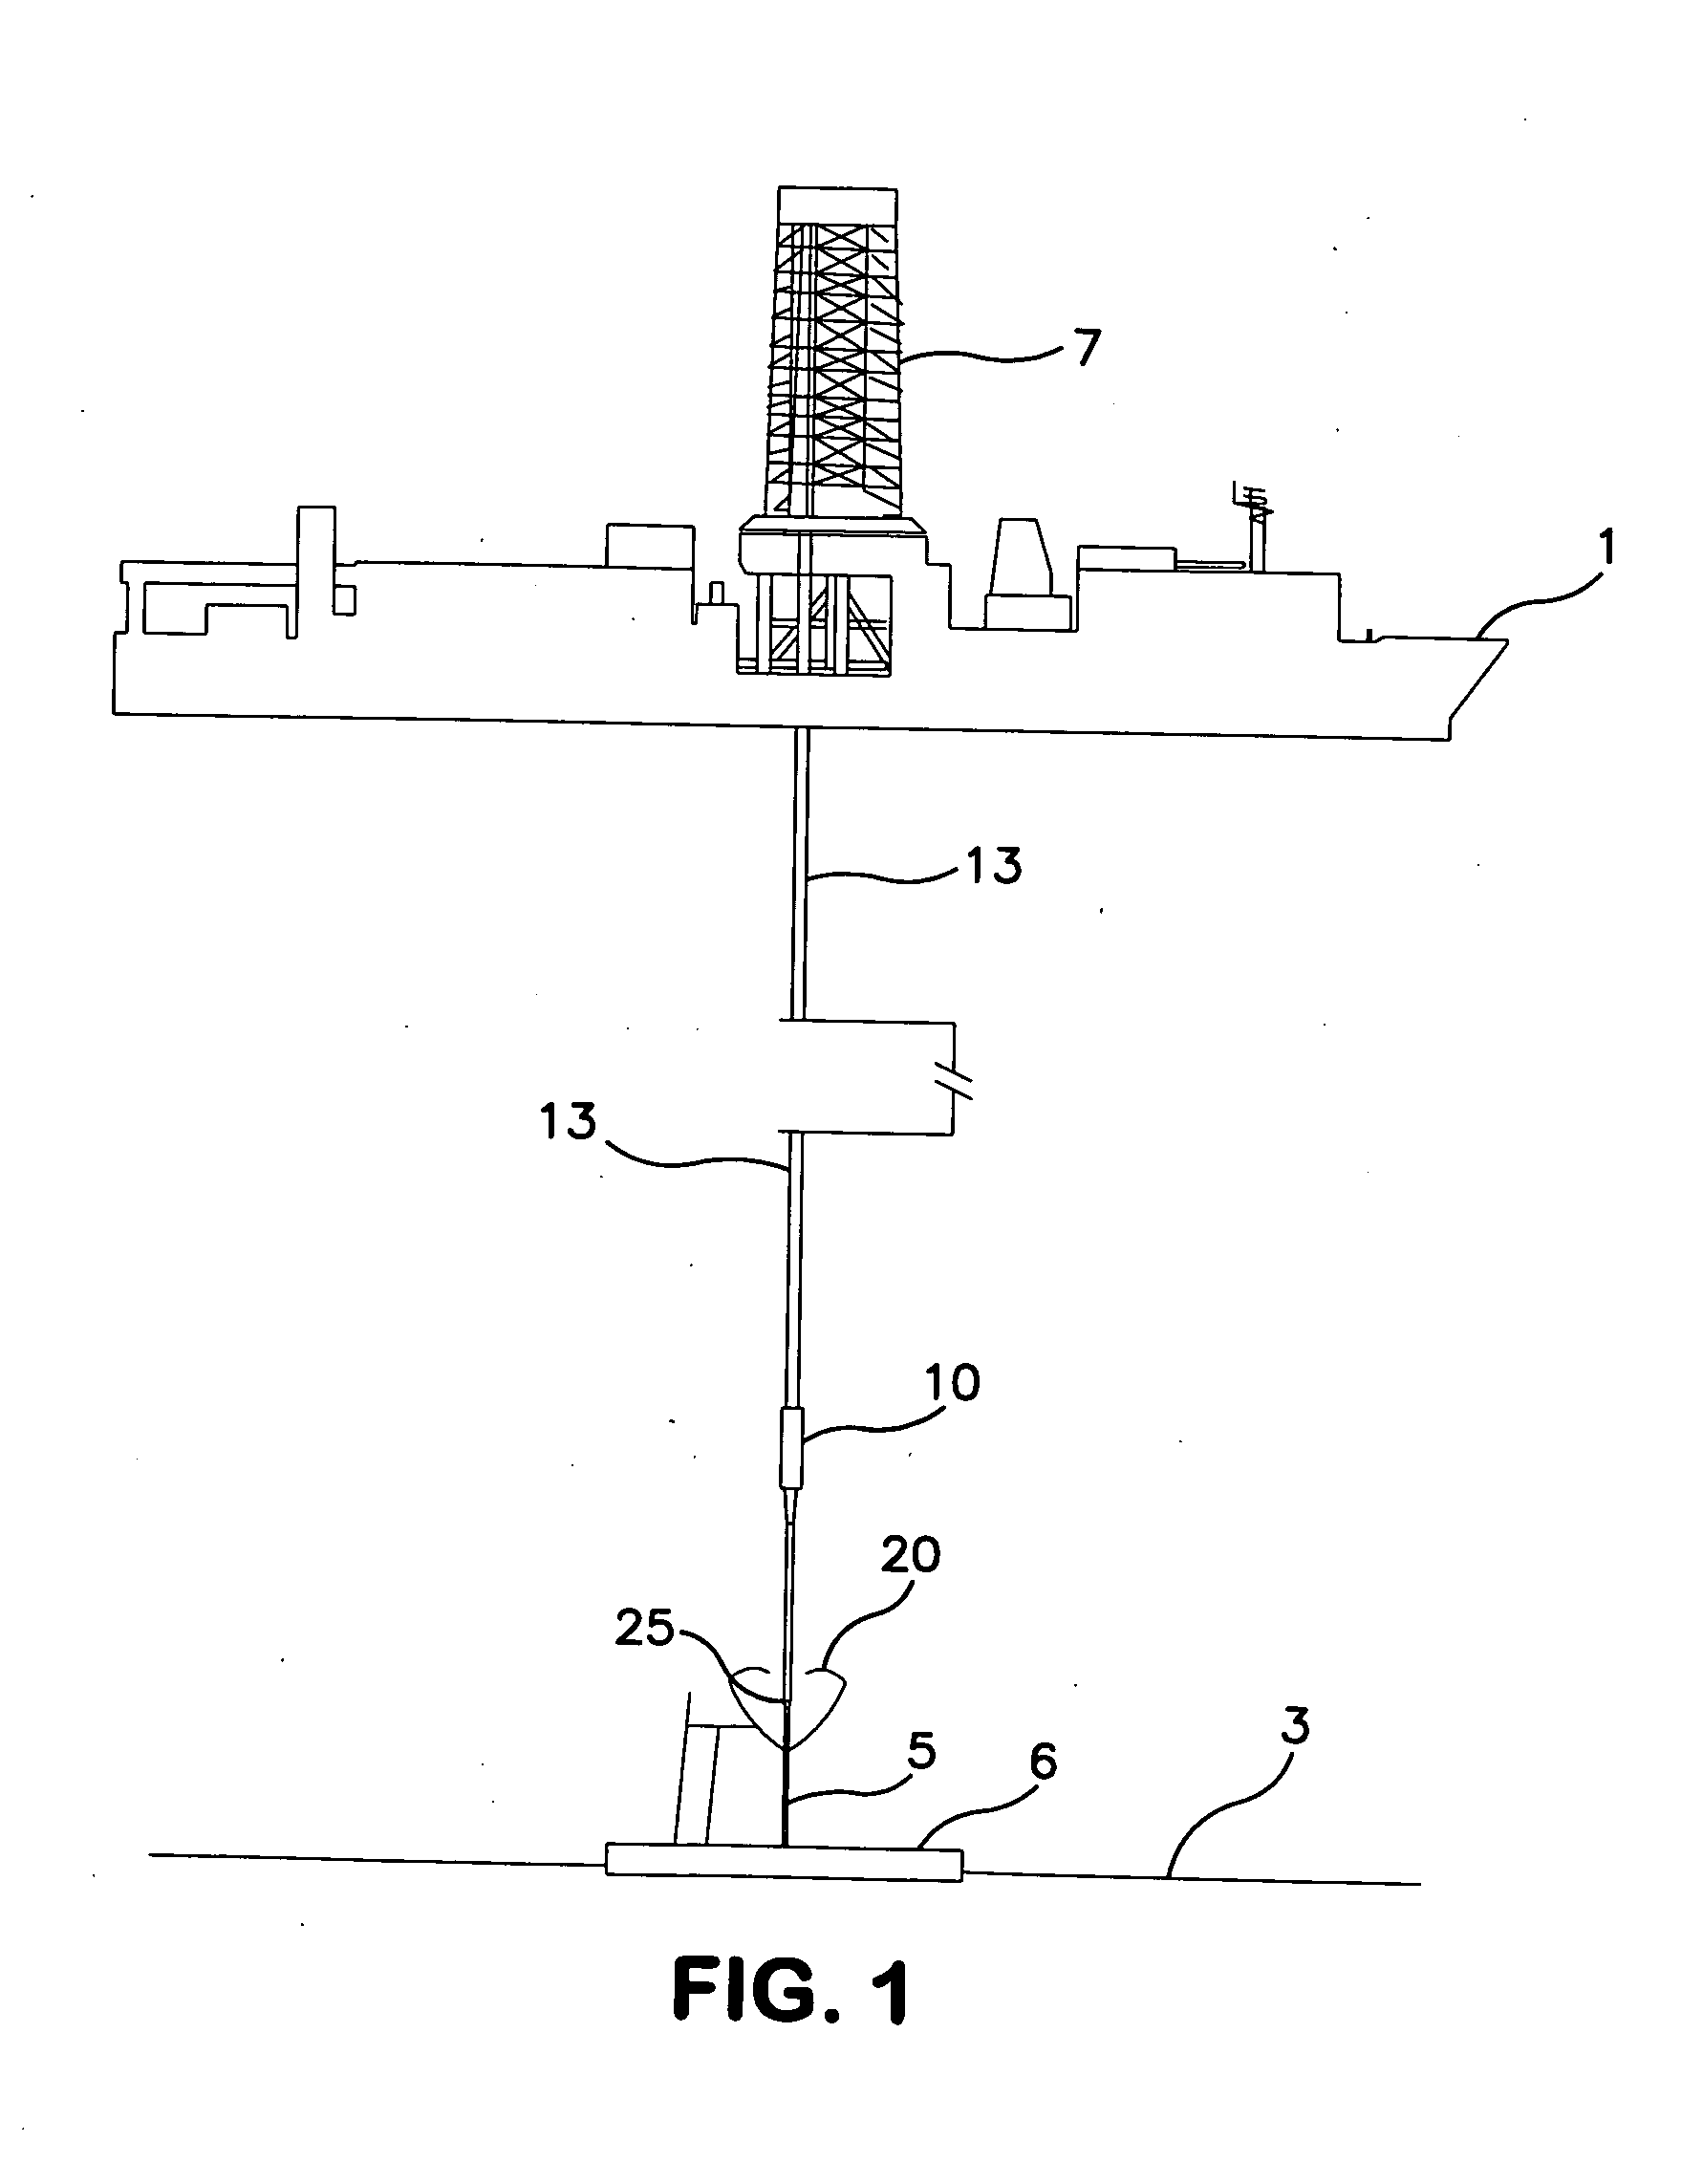 Method And Apparatus For Controlling The Flow Of Fluids From A Well Below The Surface Of The Water